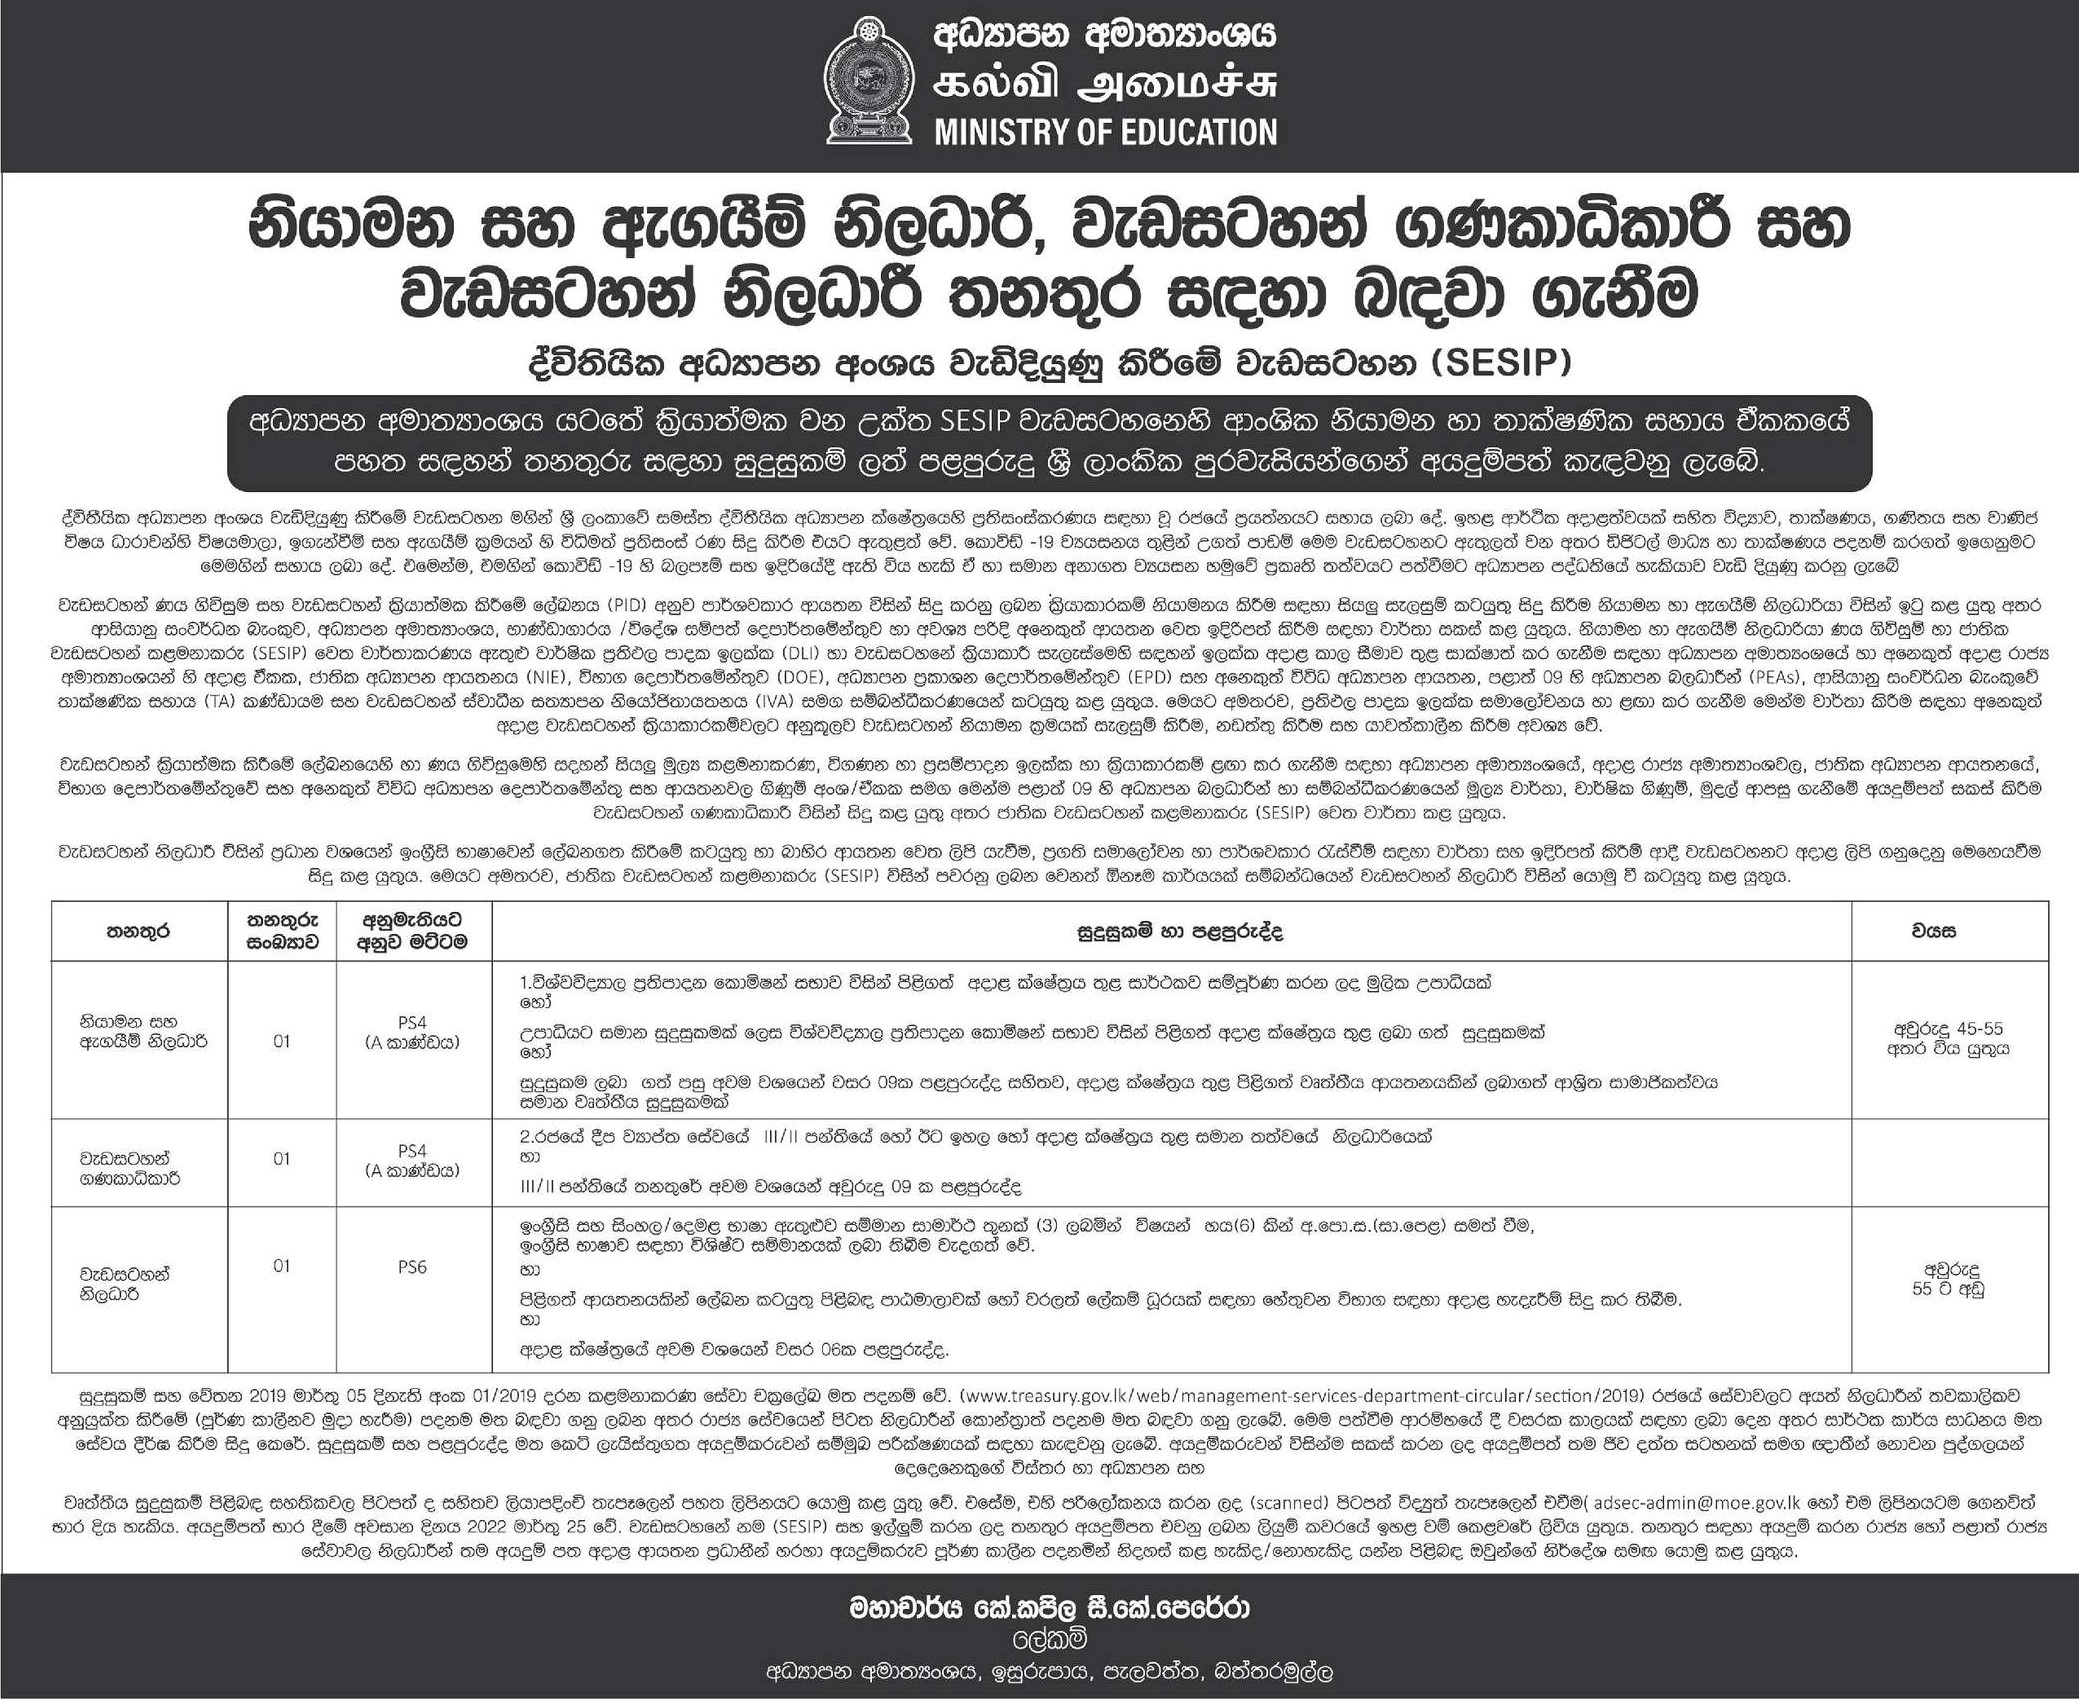 Monitoring and Evaluation Officer / Accountant / Program Officer – Ministry of Education